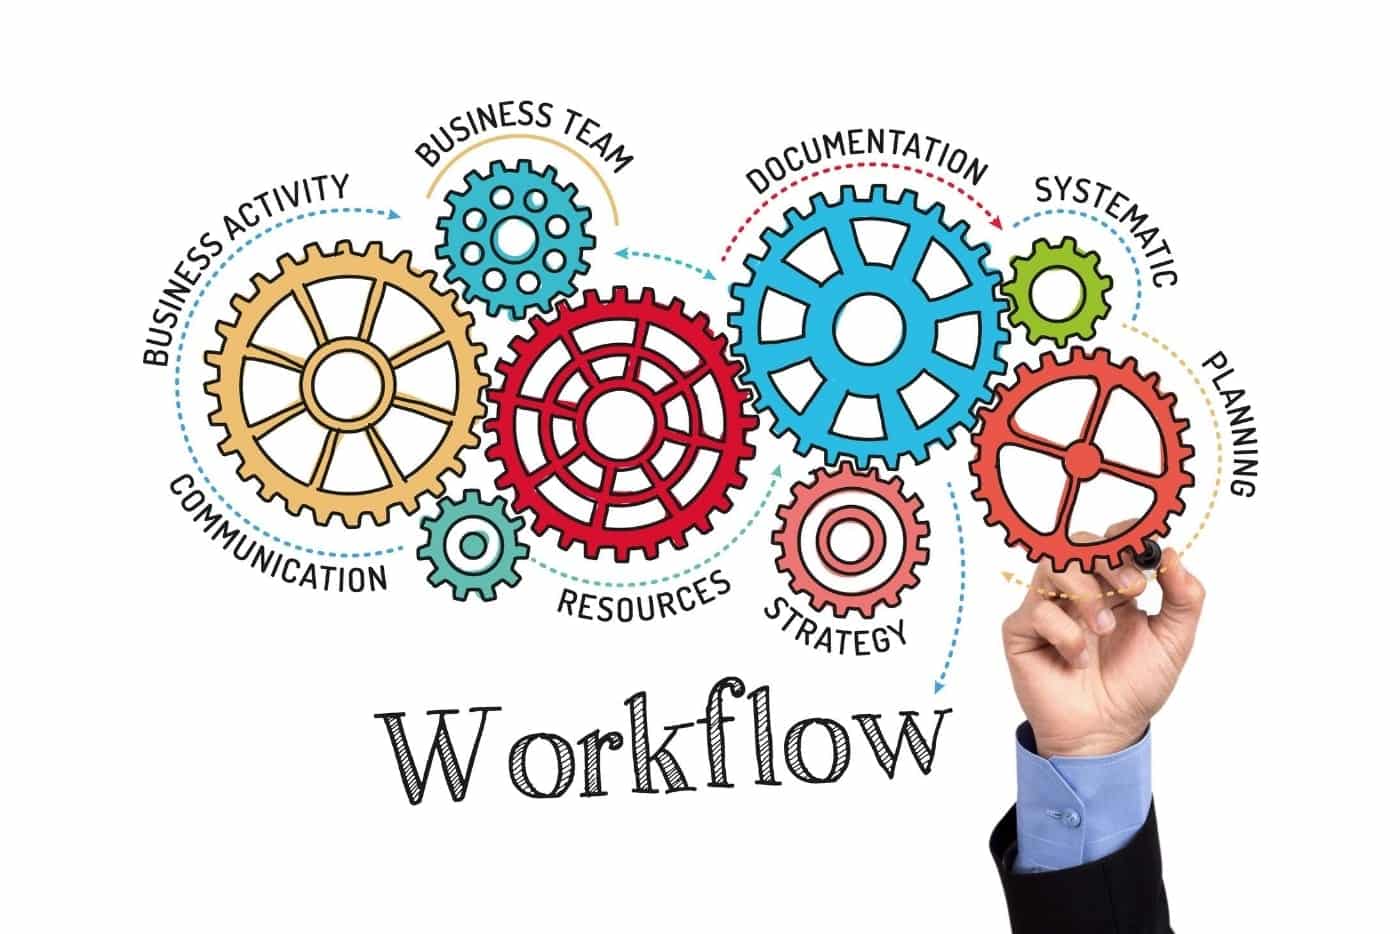 What is a Workflow Engine and why is important for business